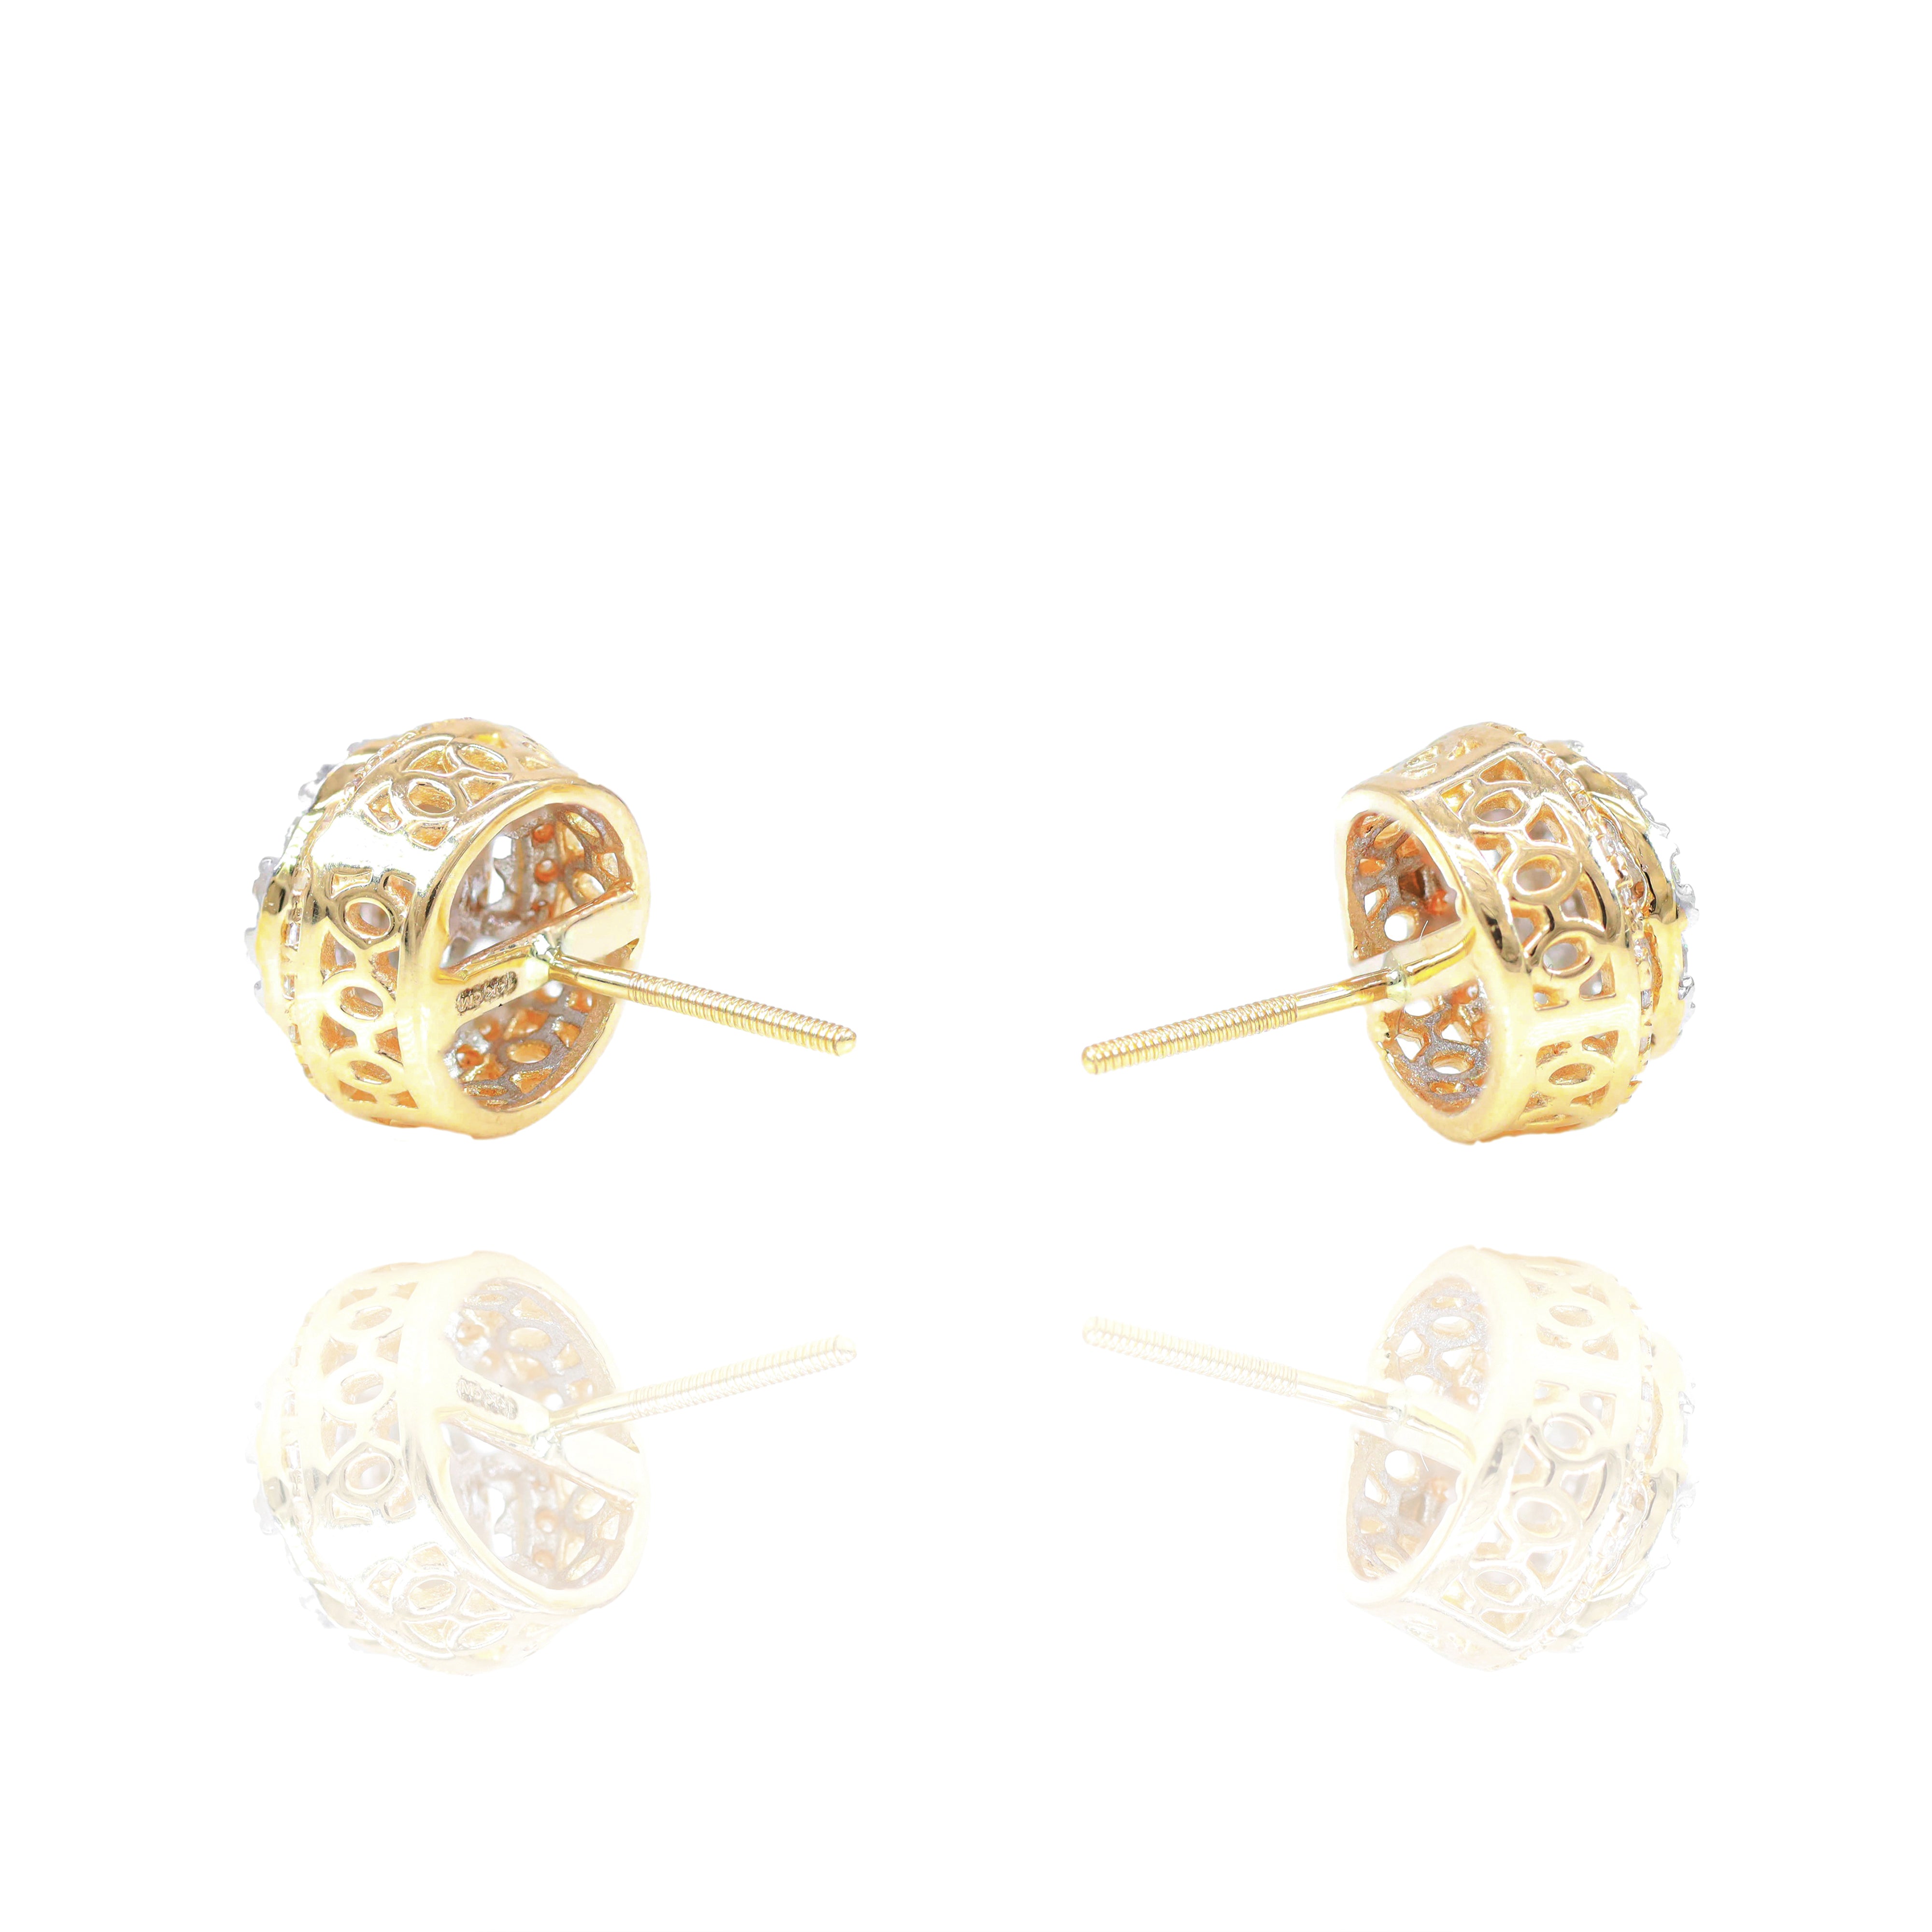 Two-Tone Round Cluster Diamond Earrings